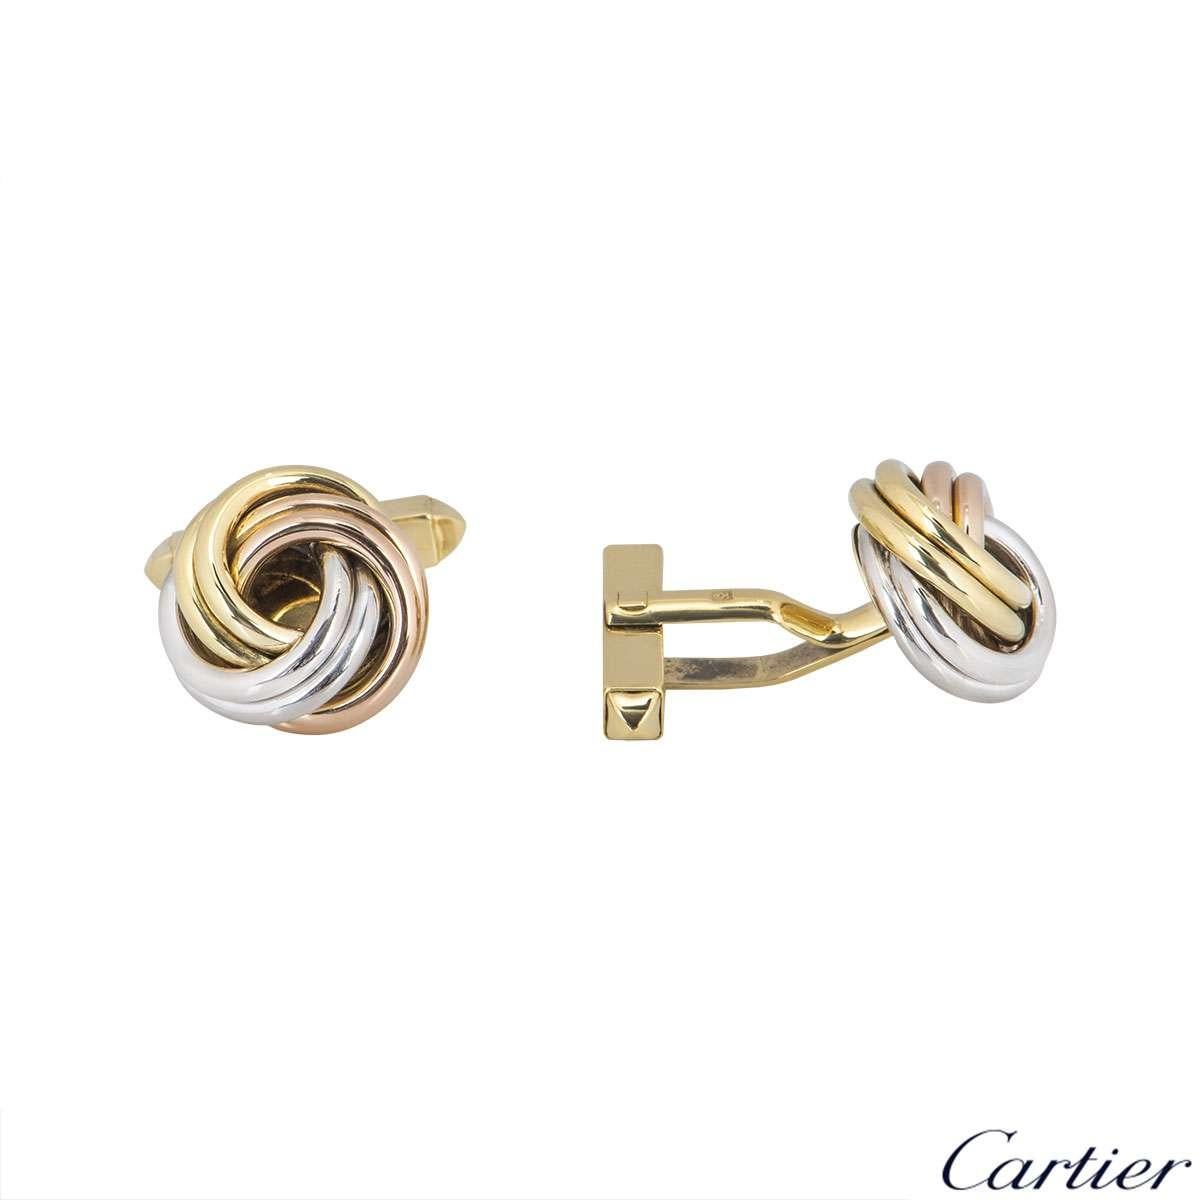 An 18k pair of tri-colour gold cufflinks by Cartier from the Trinity collection. The cufflinks are composed of a white, yellow and rose gold band interwoven into a large knot. The large knot measures 15.71mm in diameter with a classic hinged T-bar